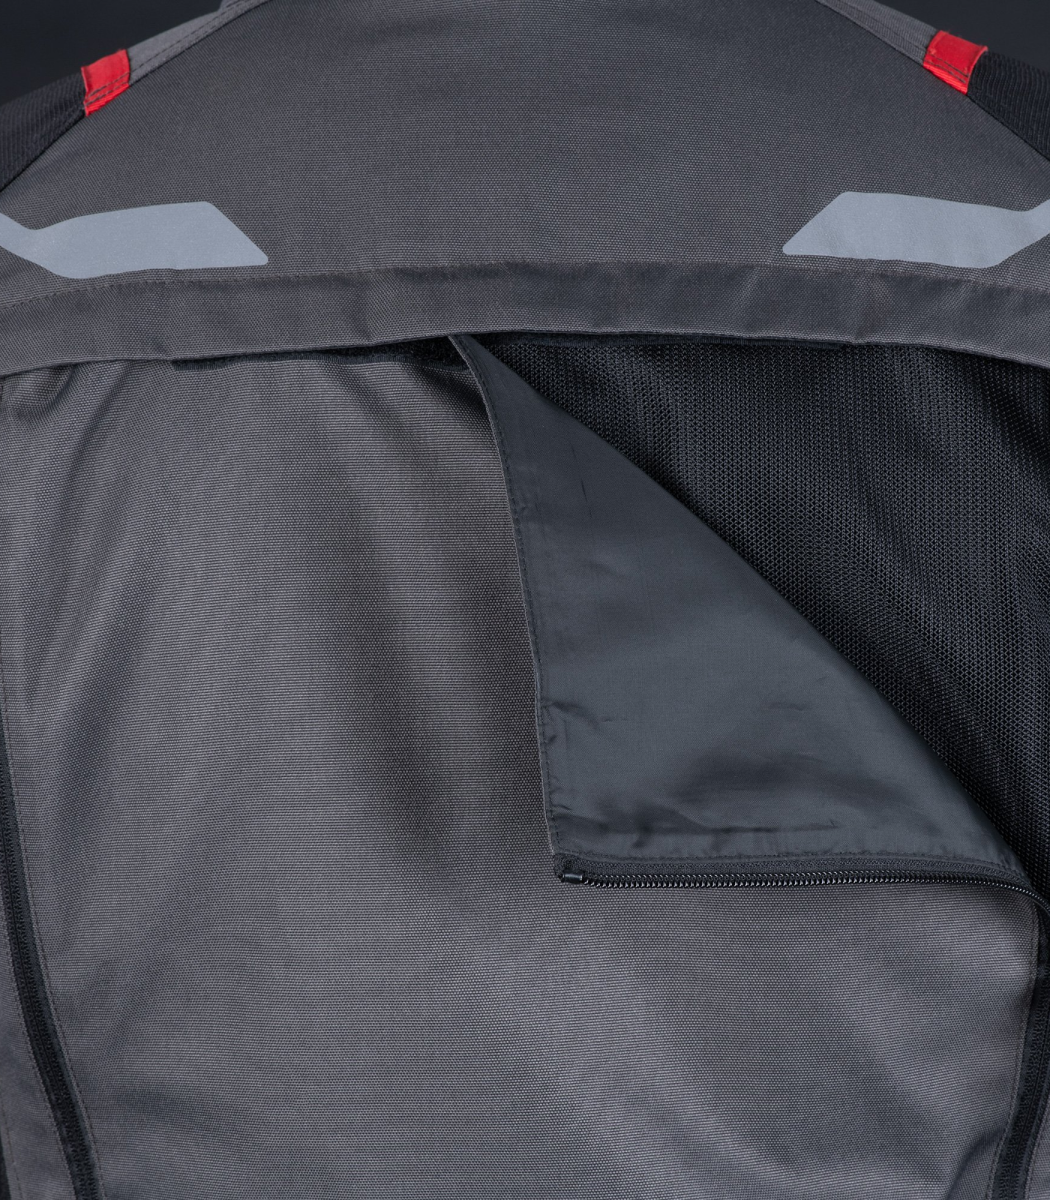 OXFORD ROCKLAND MS JACKET - CHARCOAL/BLACK/RED